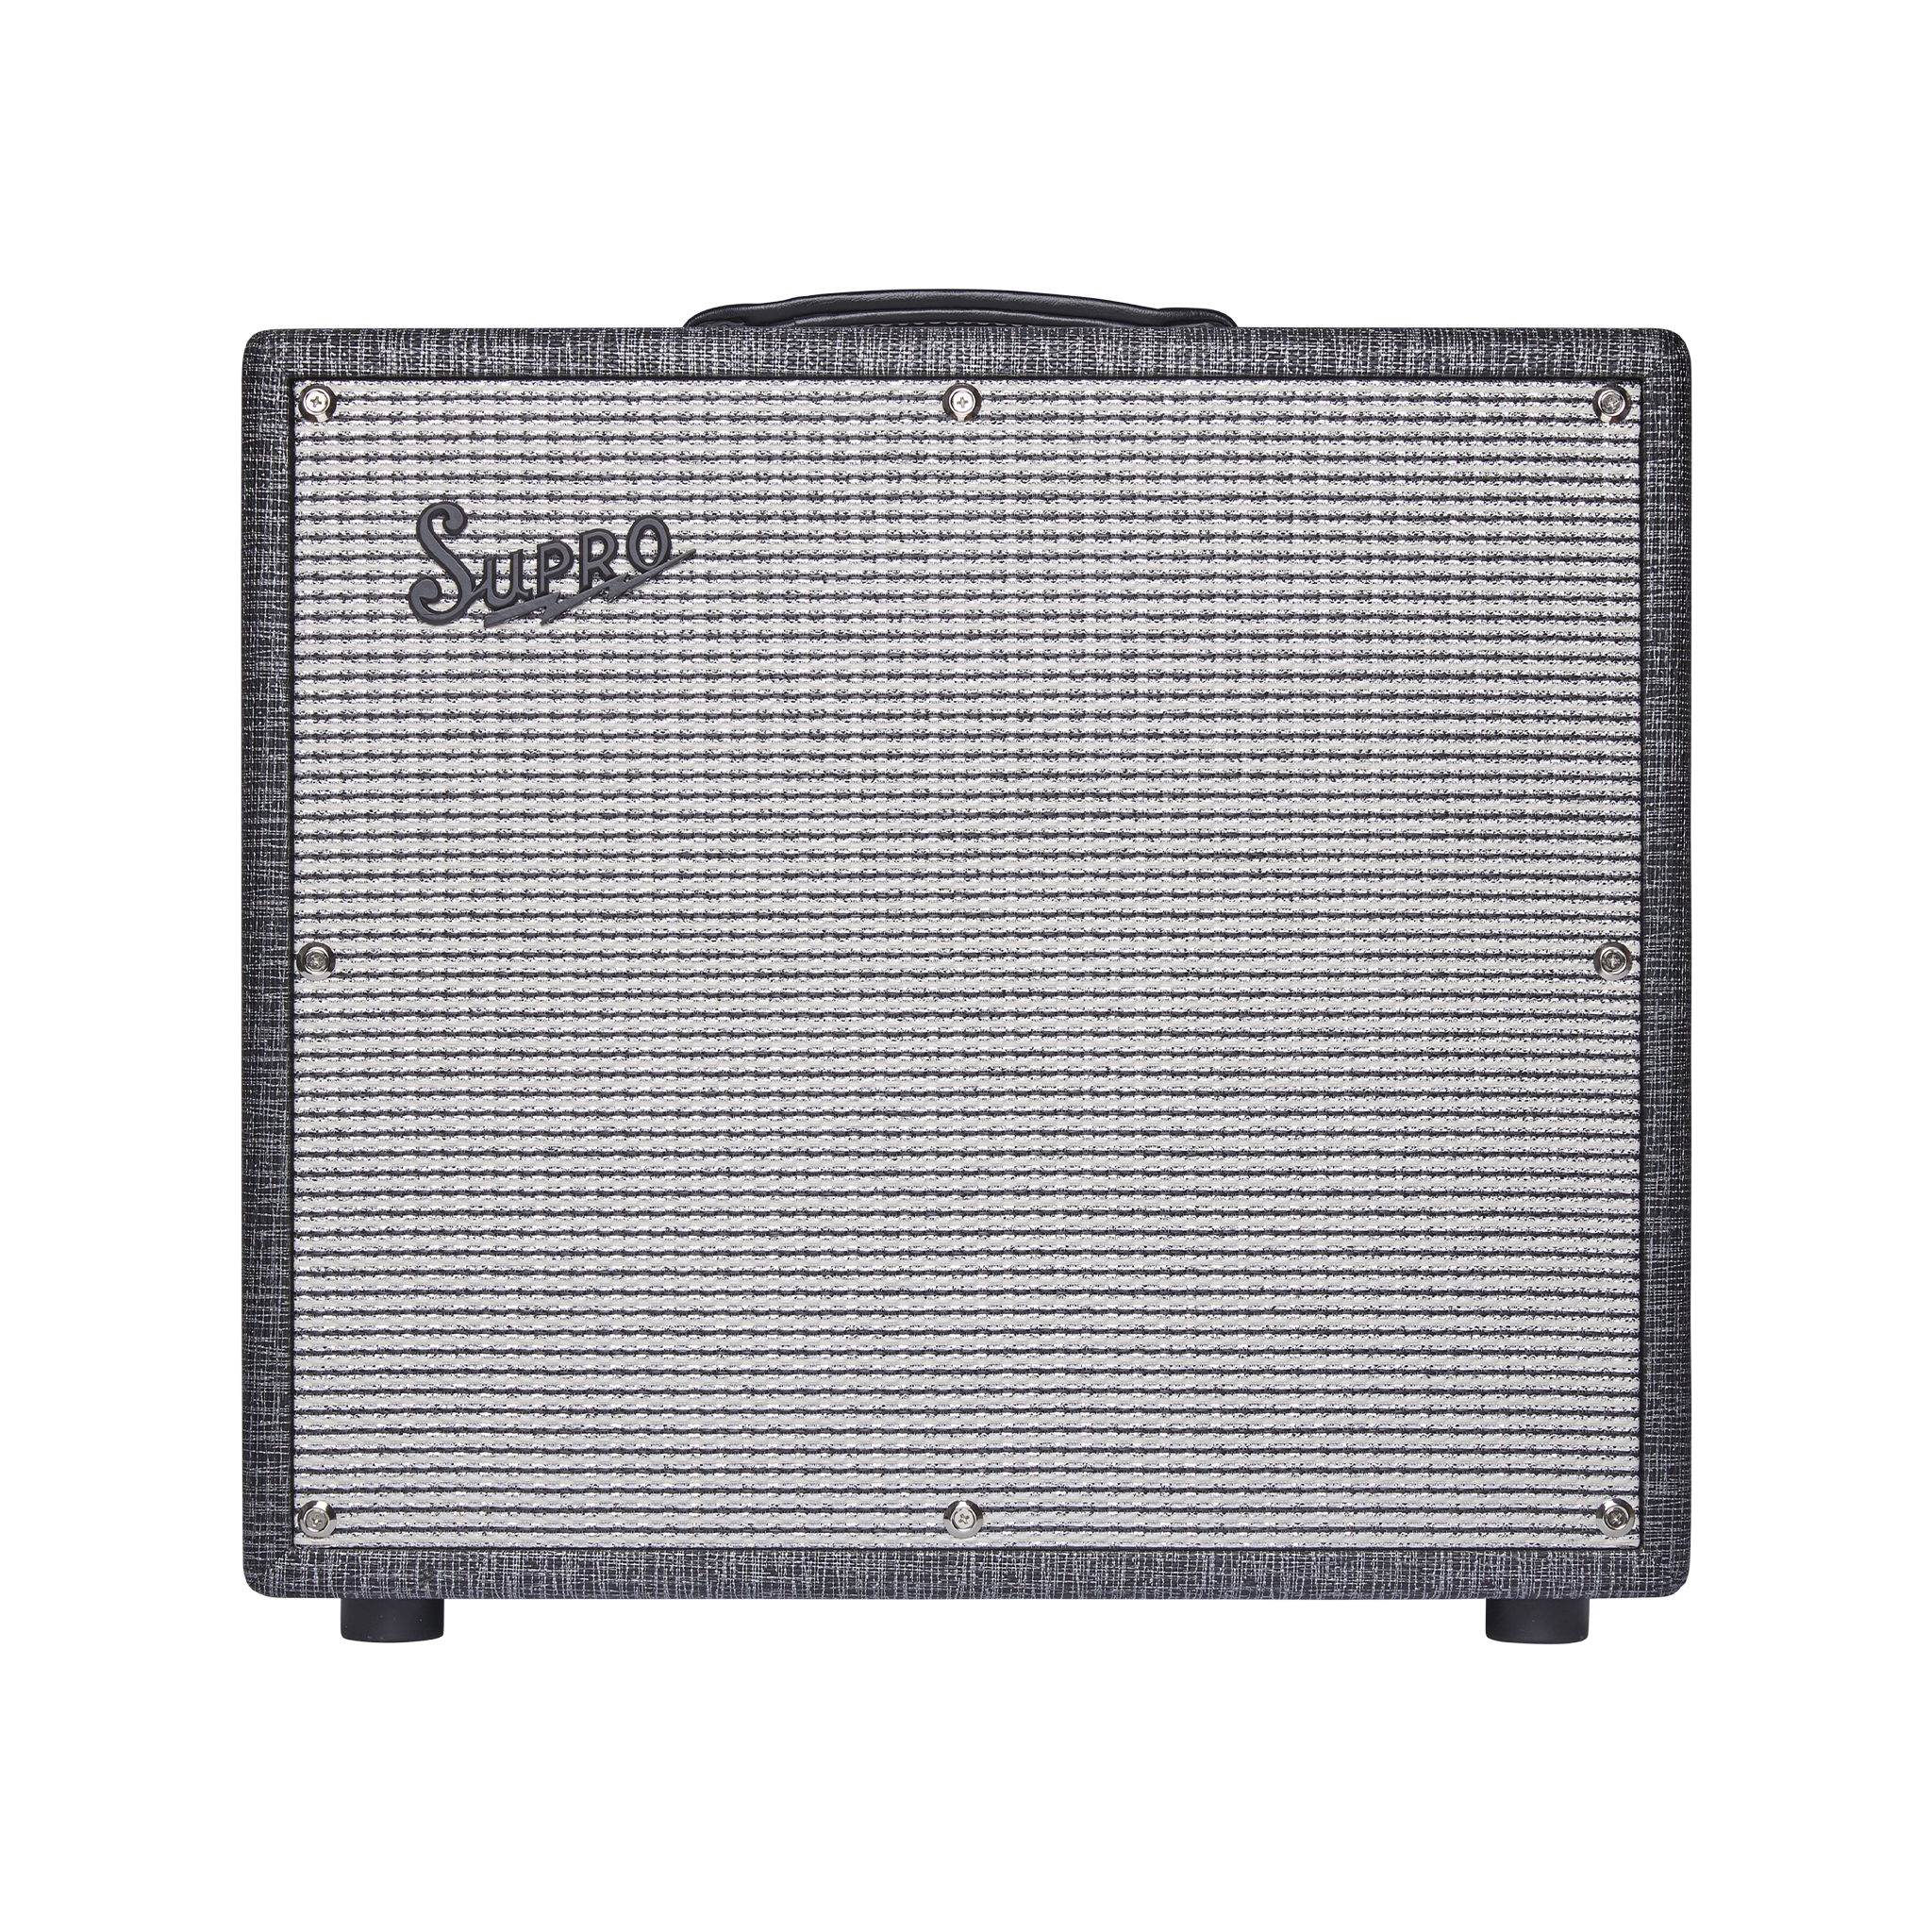 Supro 1696RT Magick Reverb 1x12 inch Guitar Combo Amplifier